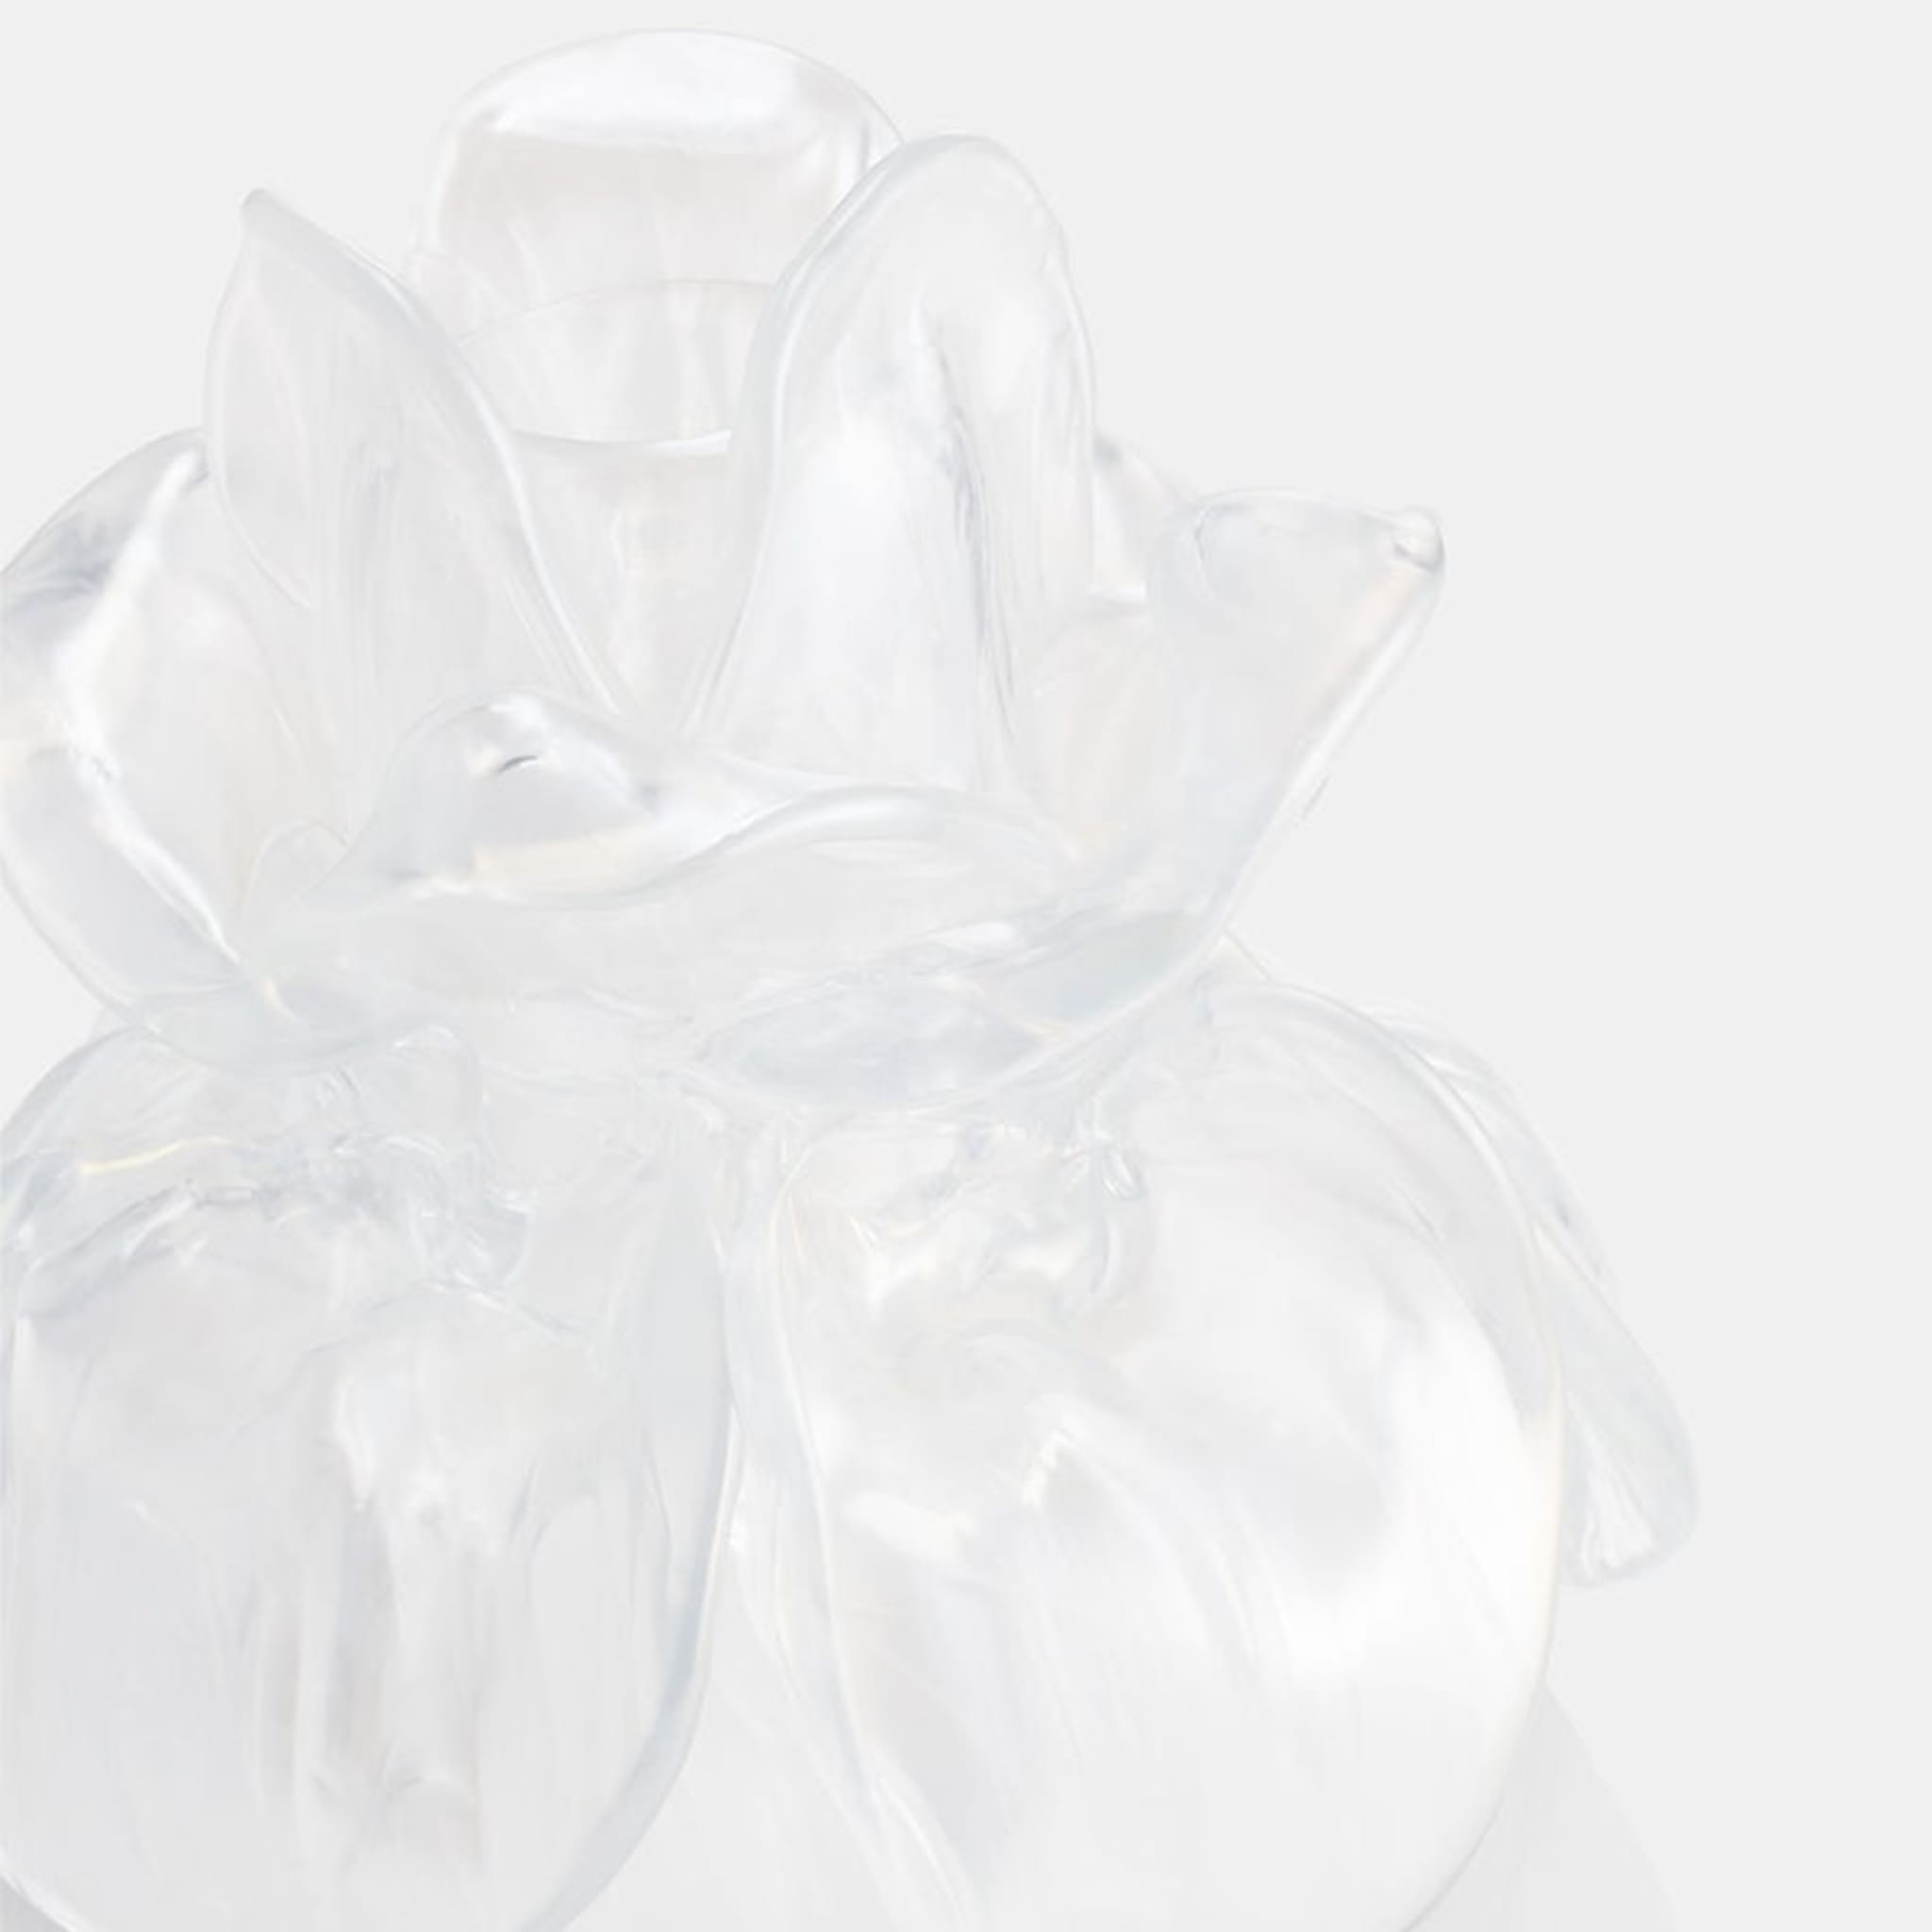 Peony White Multilayered Mouth-Blown Candle Holder  - Alternative view 1